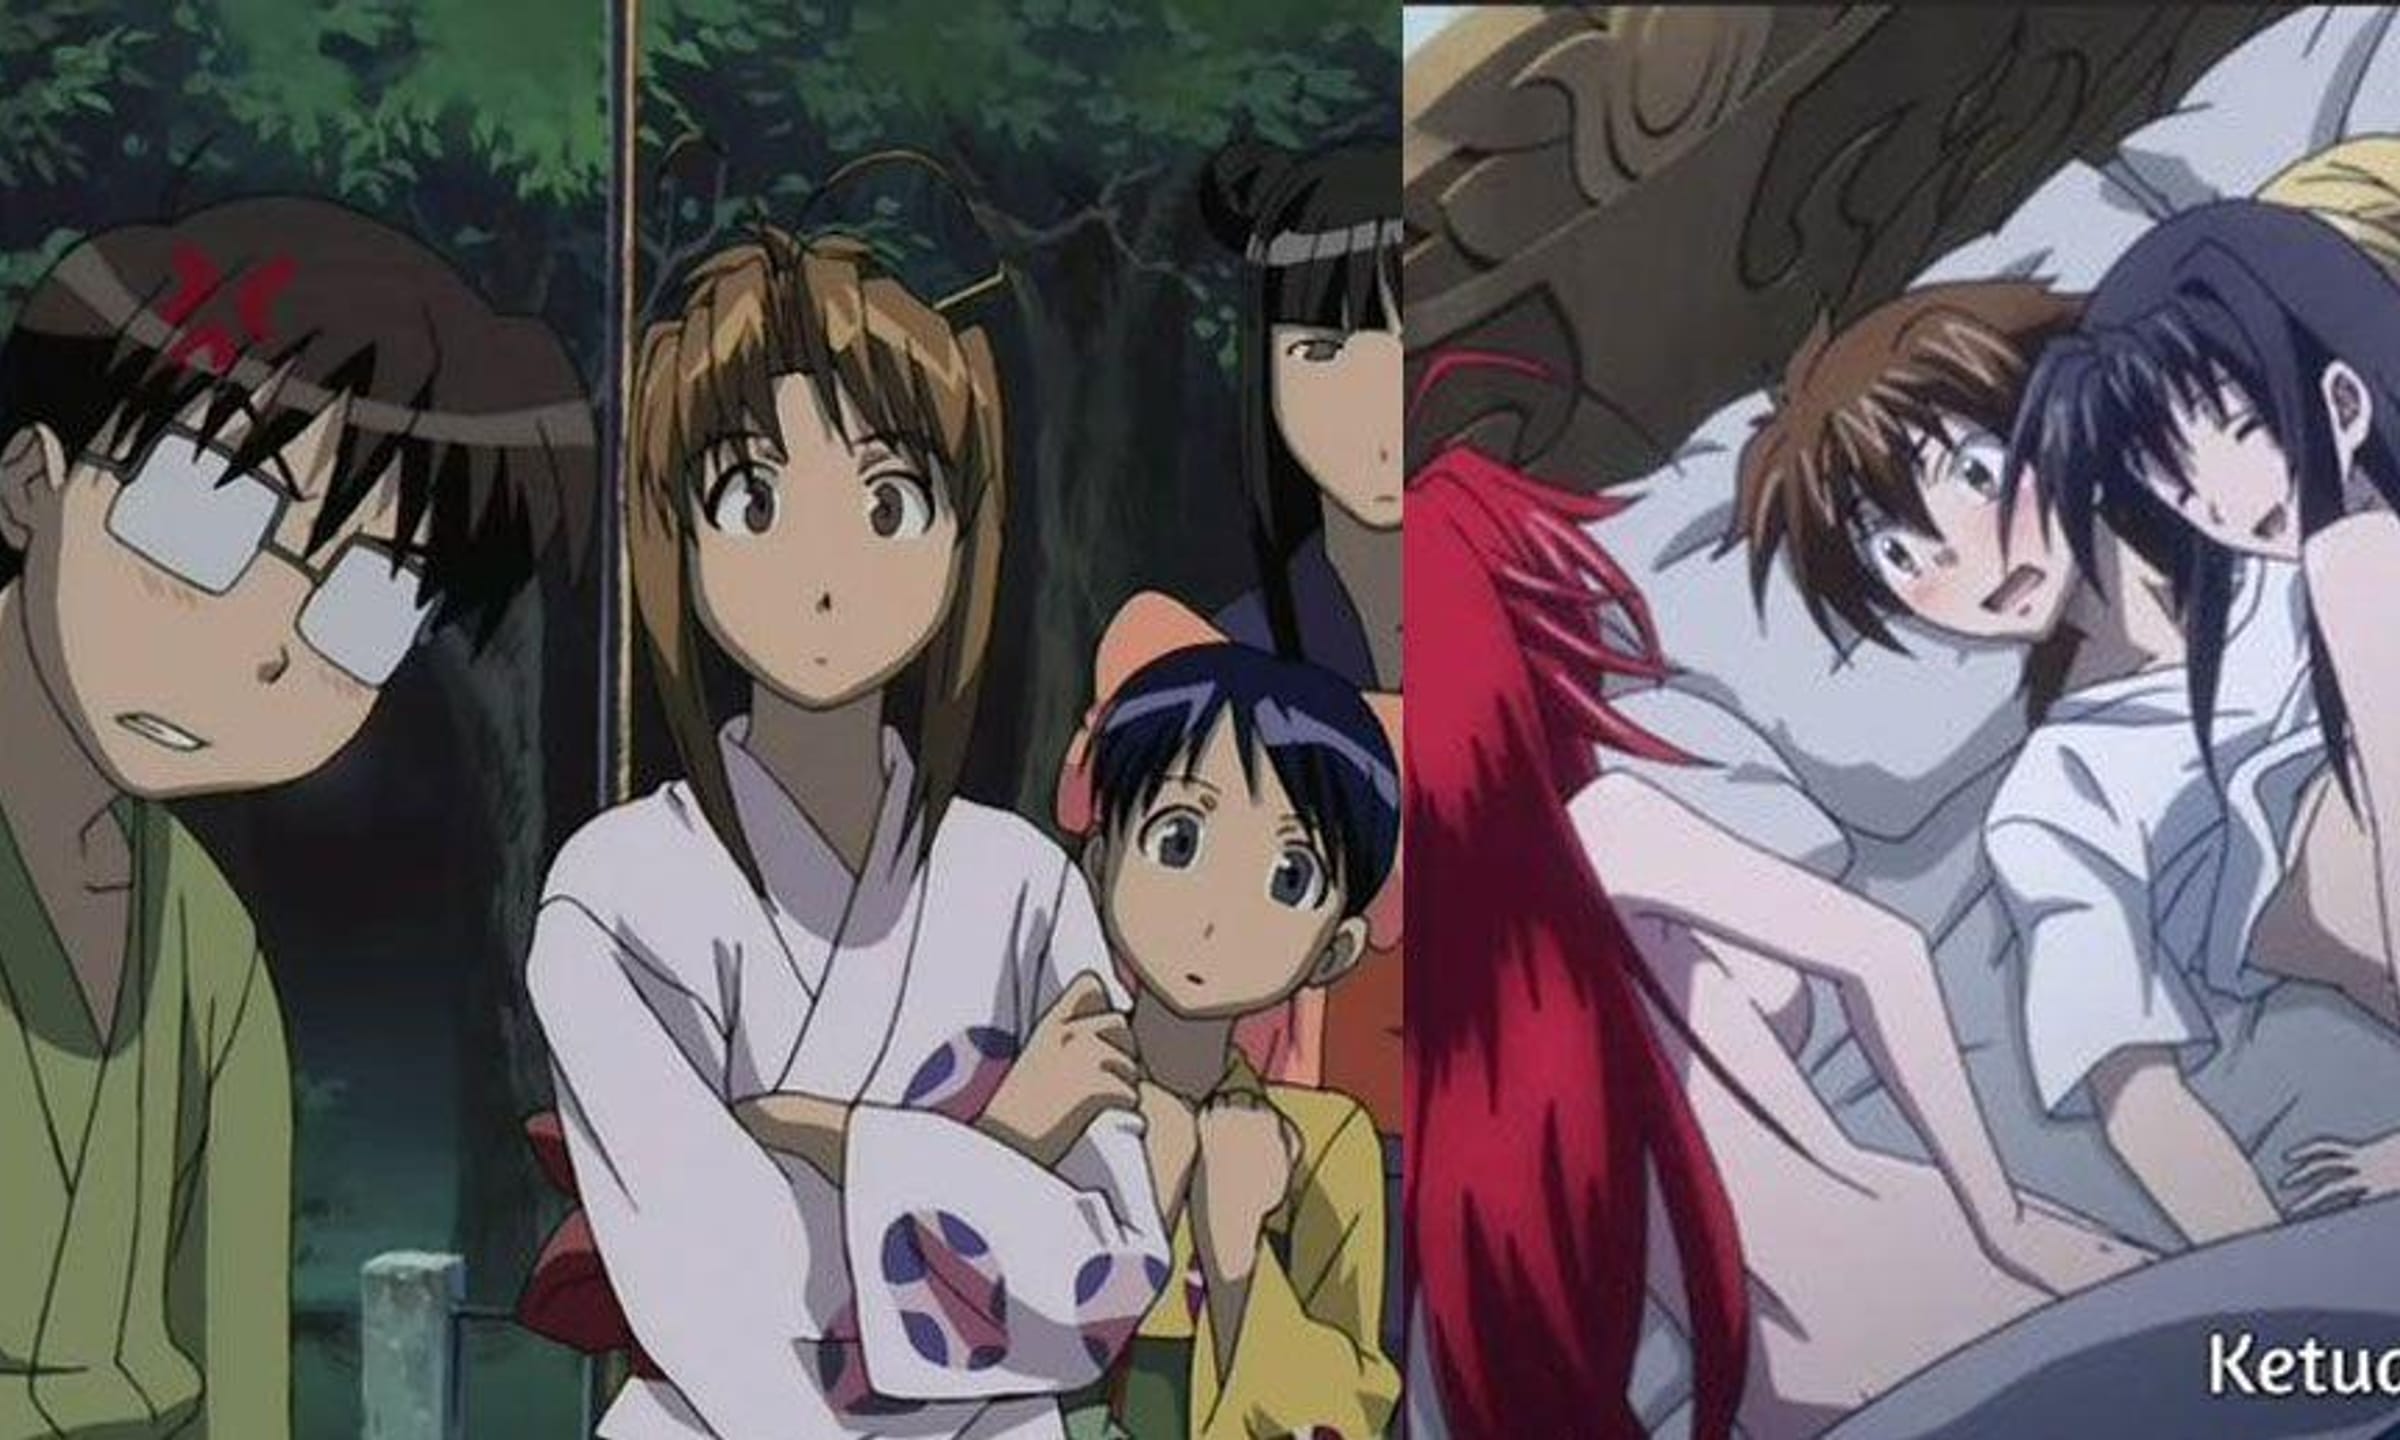 16 Anime Protagonists Who Shouldn't Have Had Harems